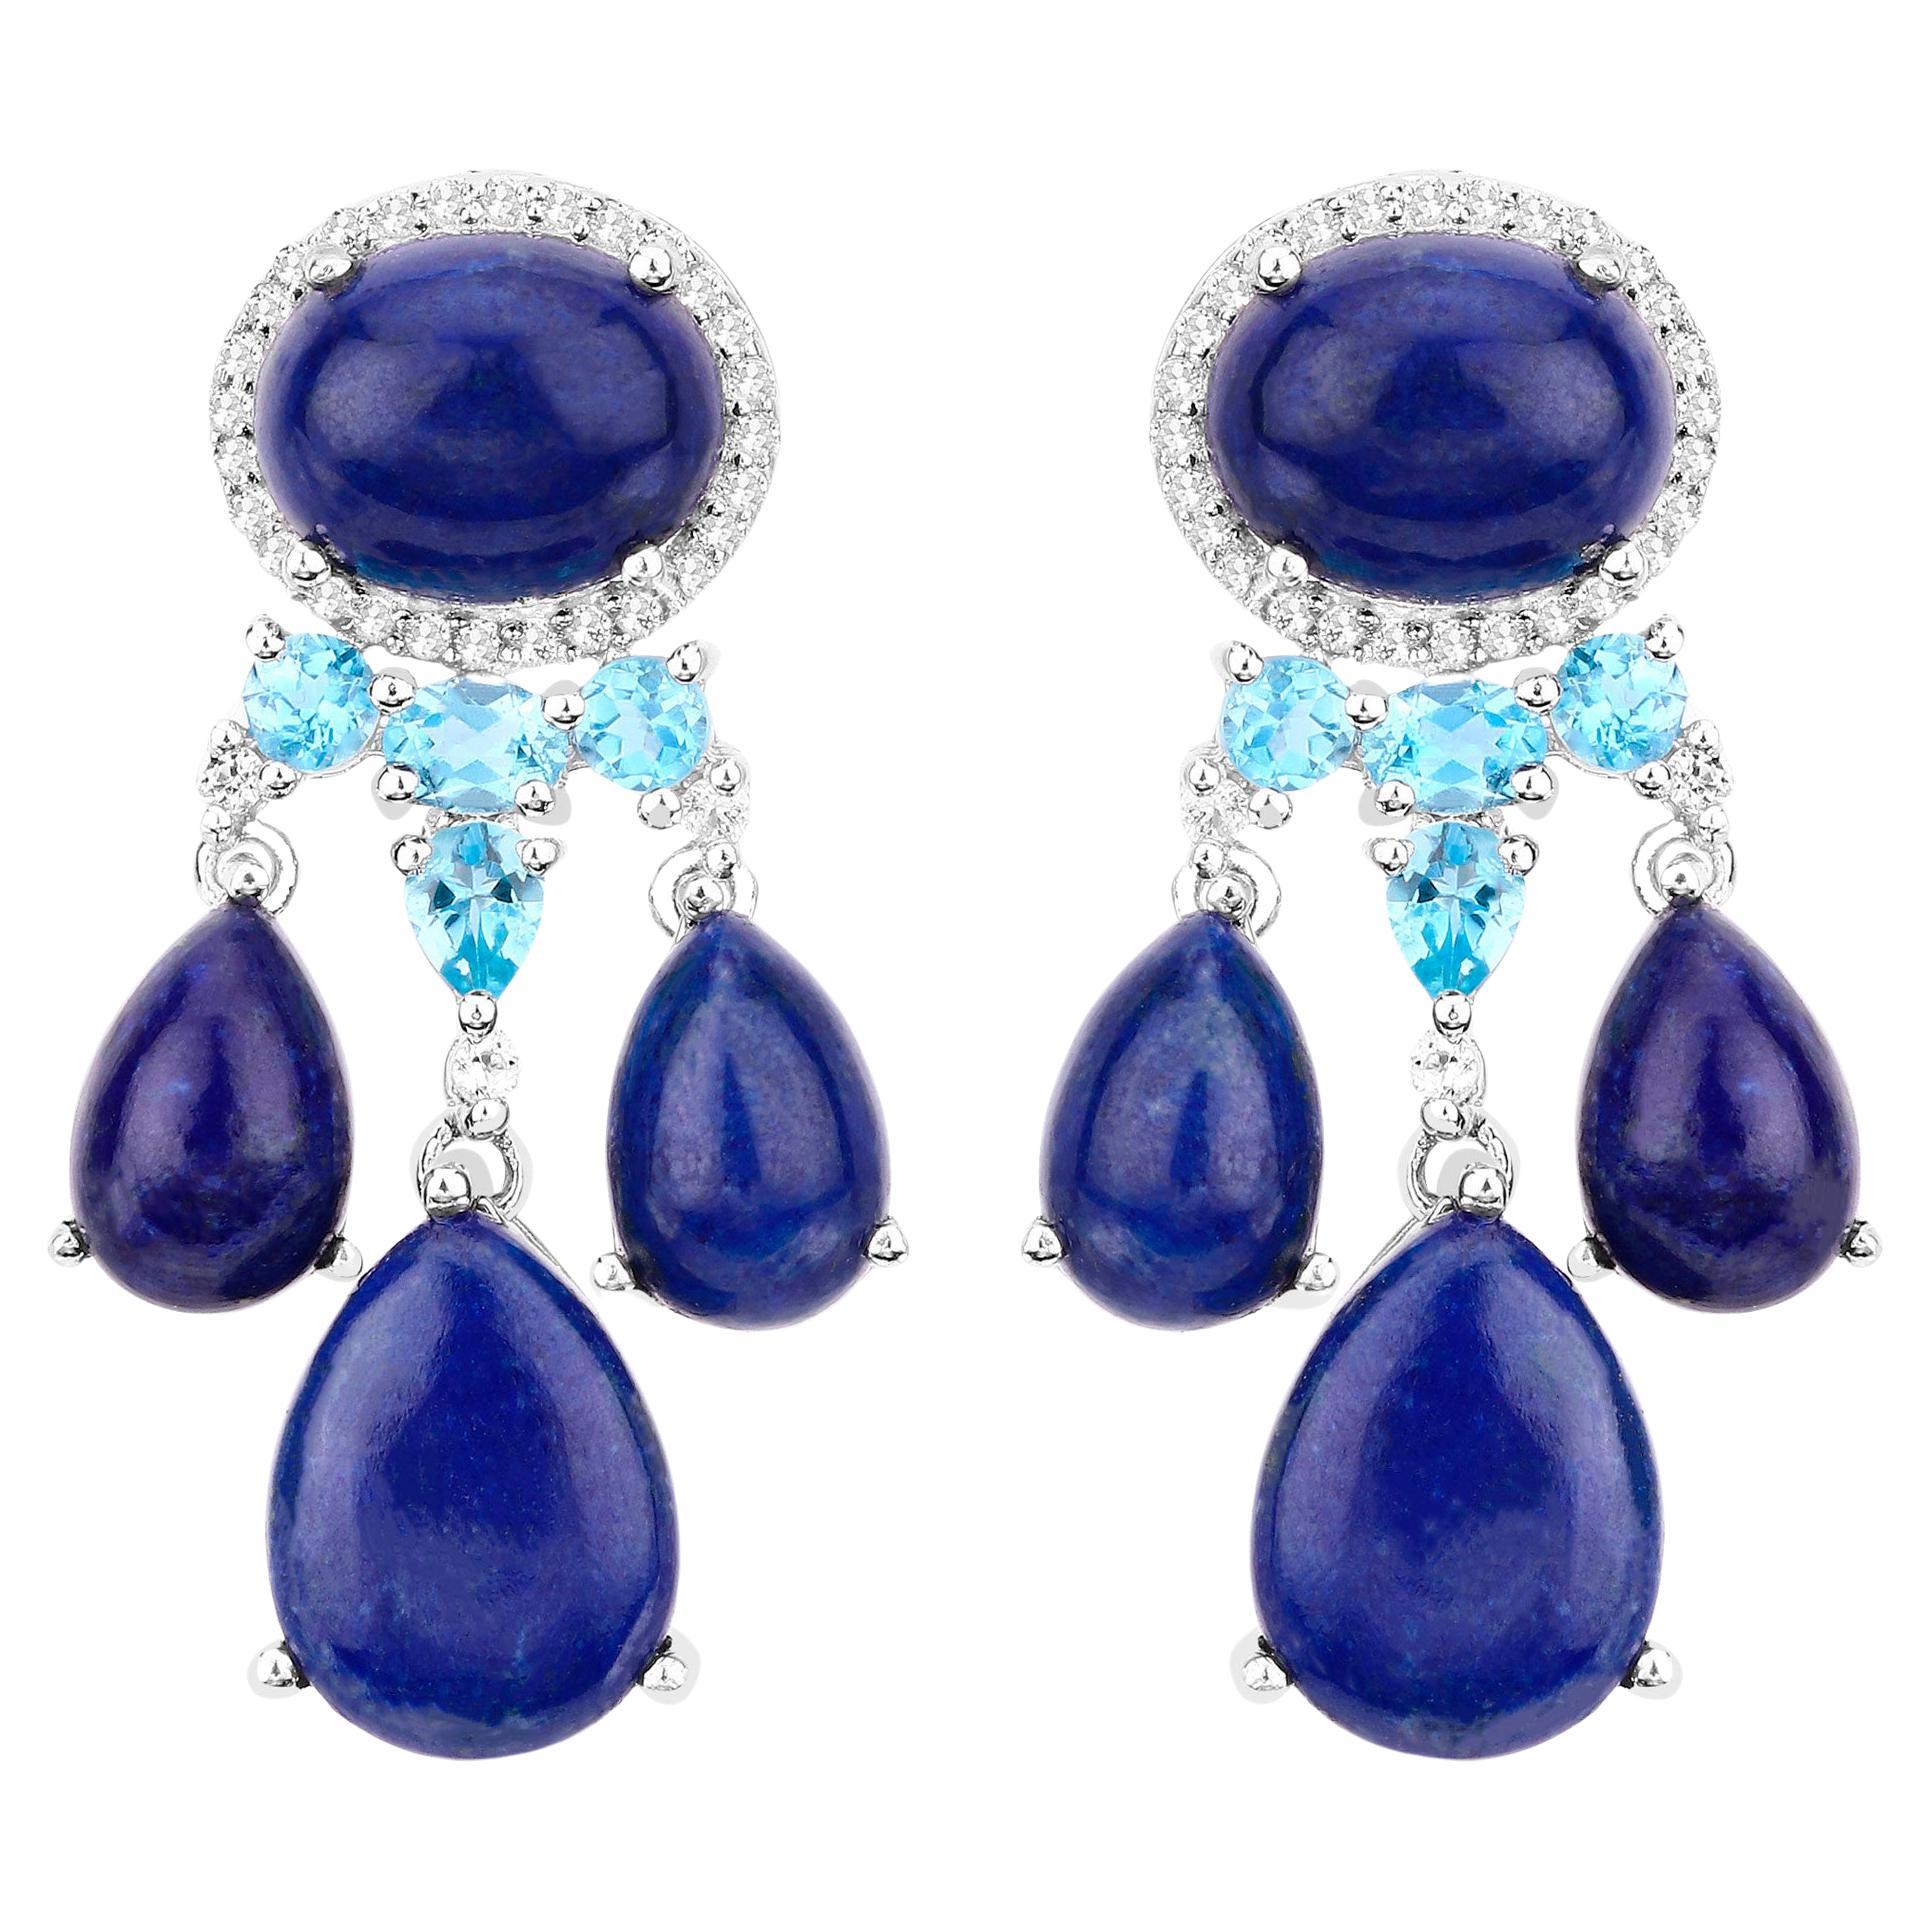 Lapis Lazuli Dangle Earrings With Swiss Blue and White Topazes 23.63 Carats